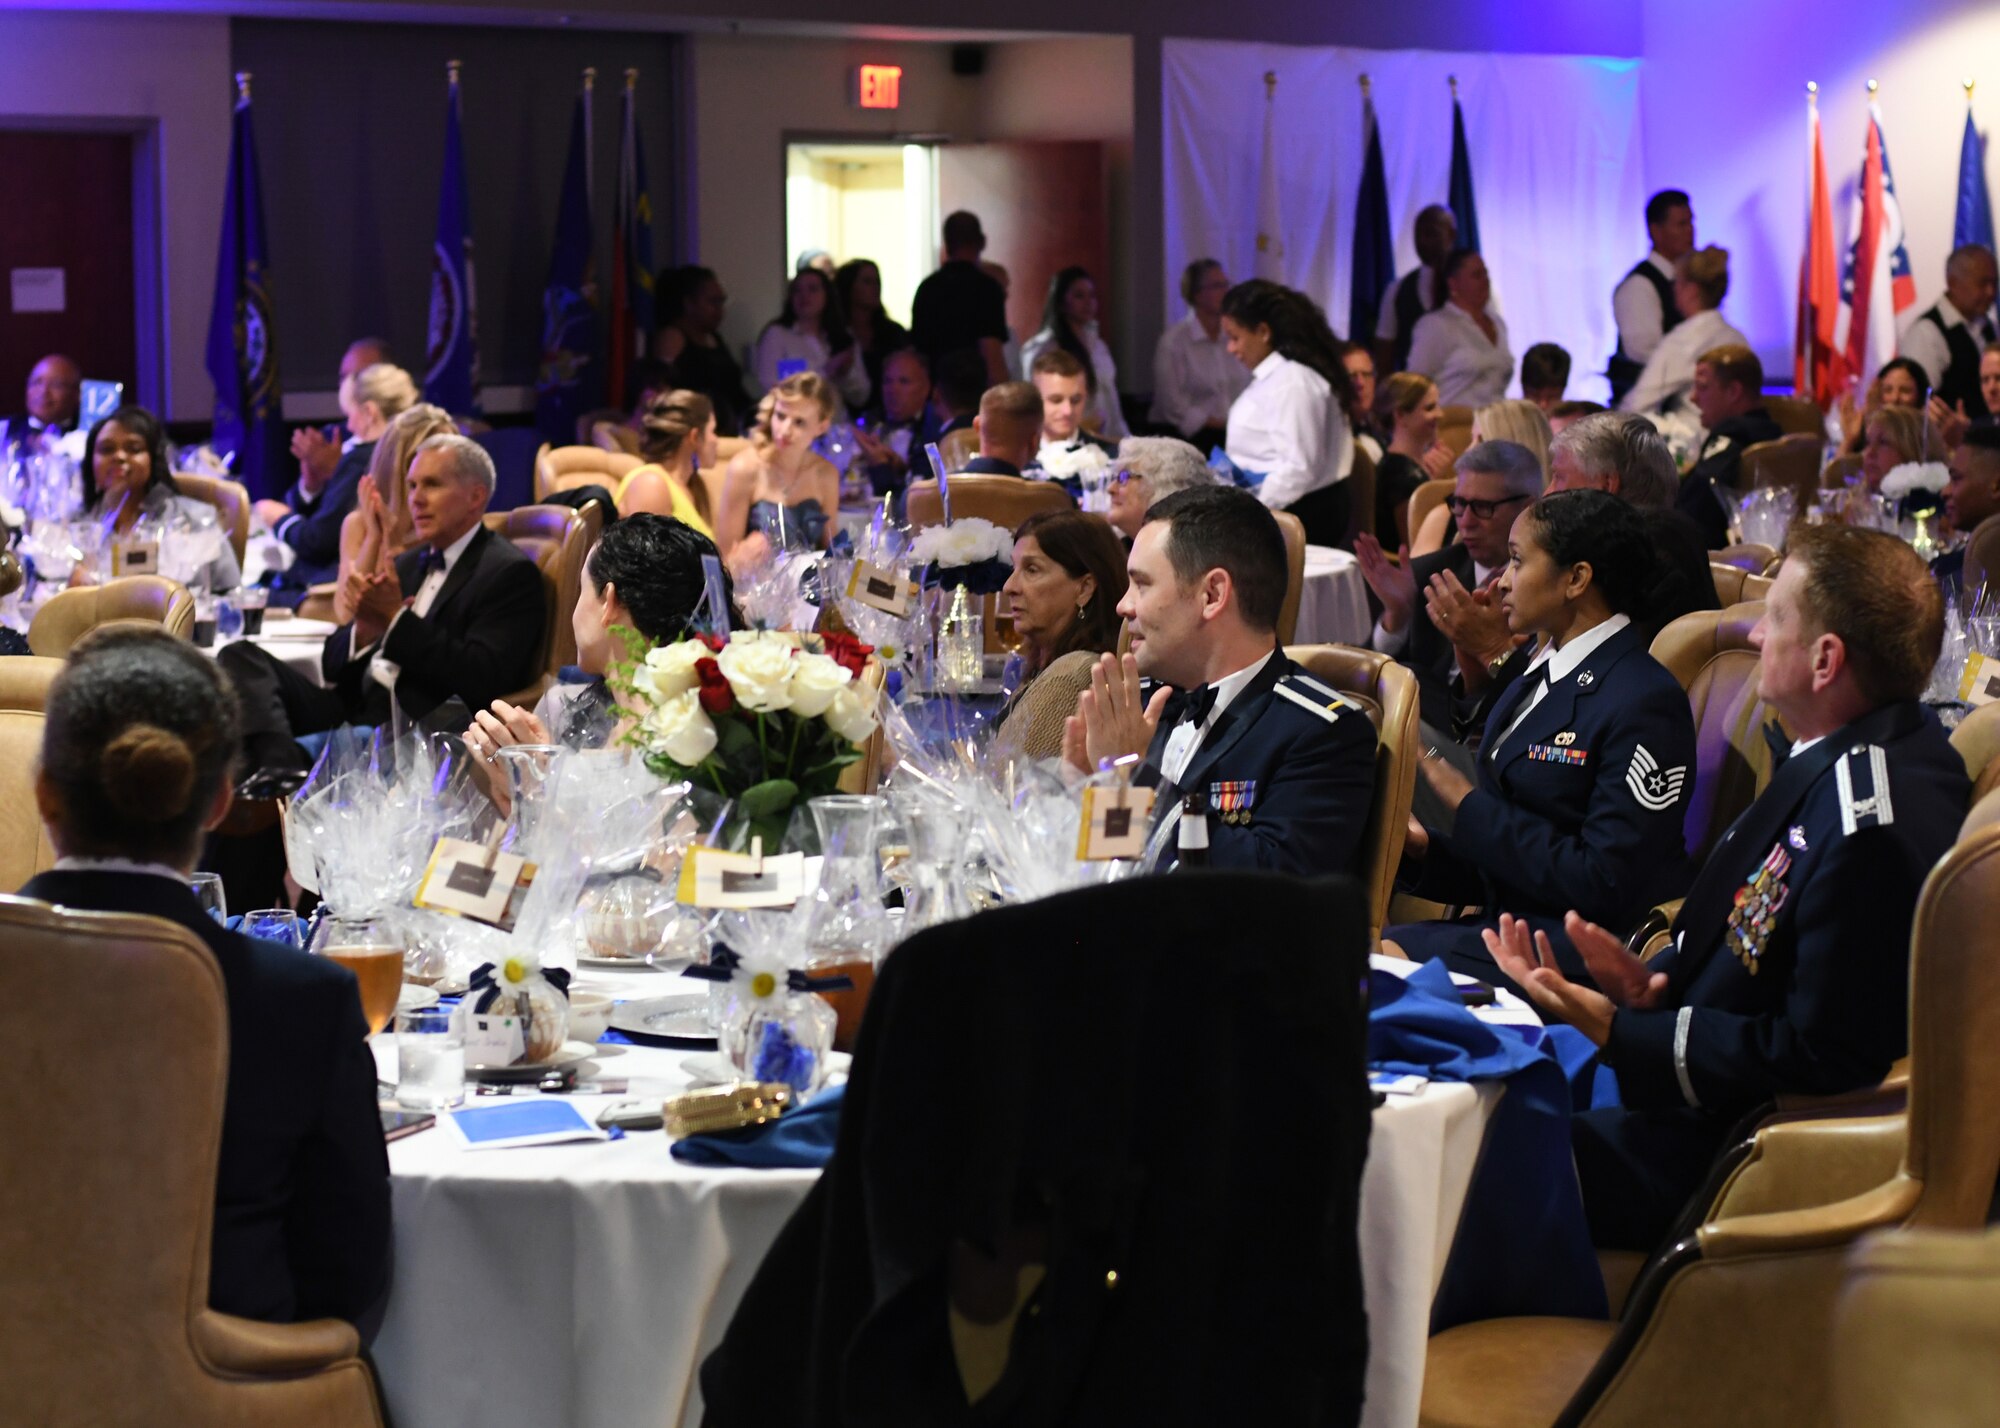 Air Force Ball attendees clap as Col. Wayne Waddell, United States Air Force retired, finishes speaking at Dobbins Air Reserve Base, Ga, Sept. 8, 2018. During the ball, which was hosted by the 94th Airlift Wing, Waddell spoke about his time as a prisoner of war in Vietnam, and answered questions that any attendees may have had with regards to his imprisonment. (U.S. Air Force Photo by Staff Sgt. Miles Wilson)